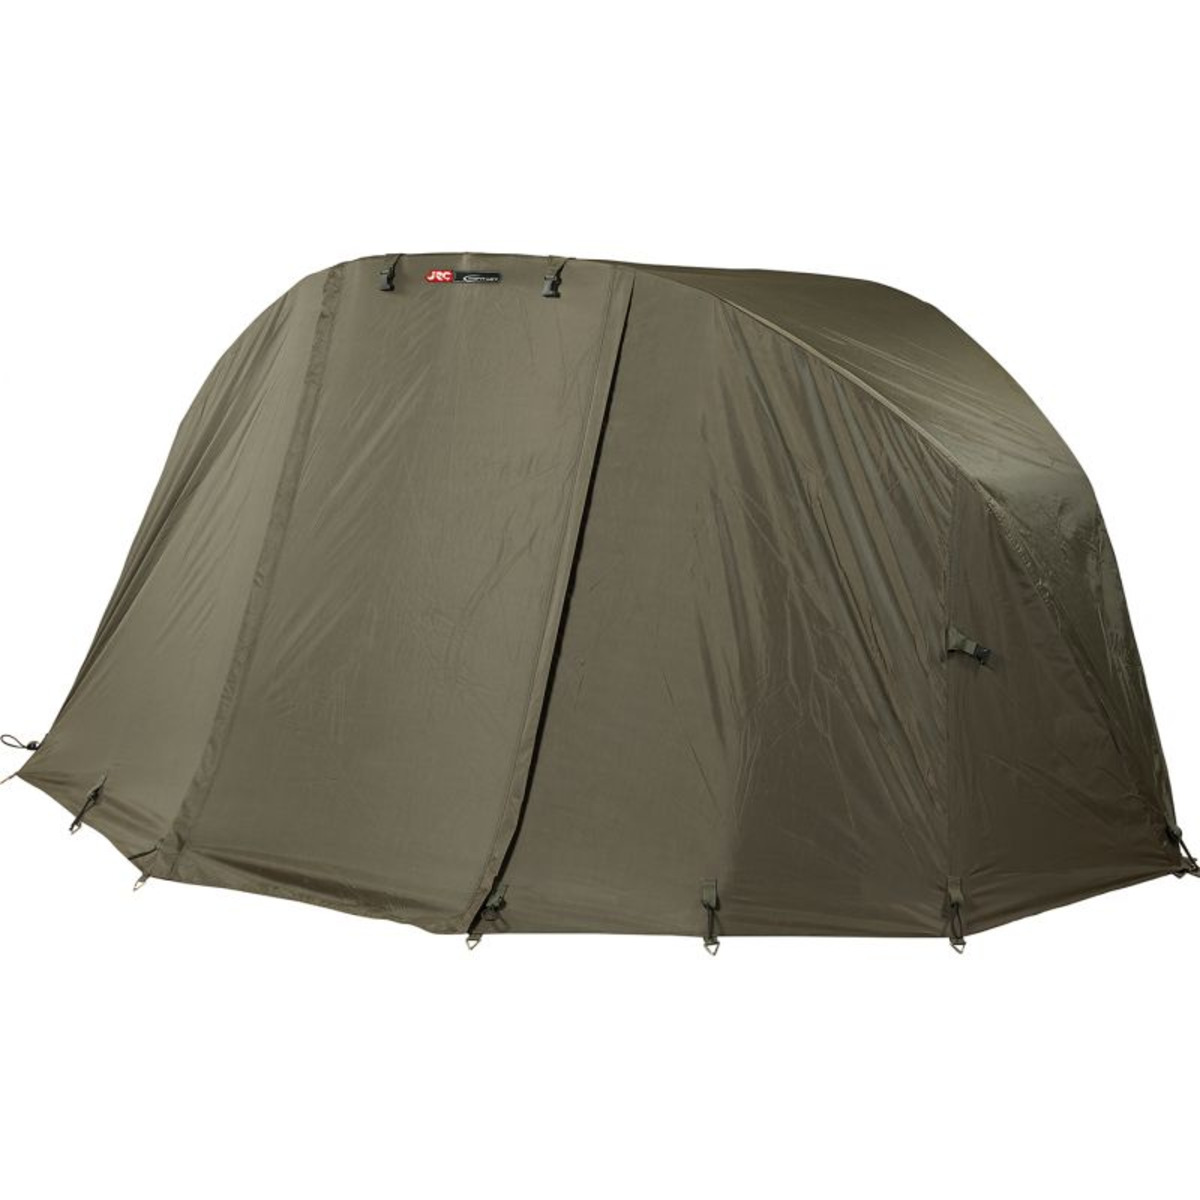 JRC Contact Brolly - 190x130x270 cm -  Surtoile         